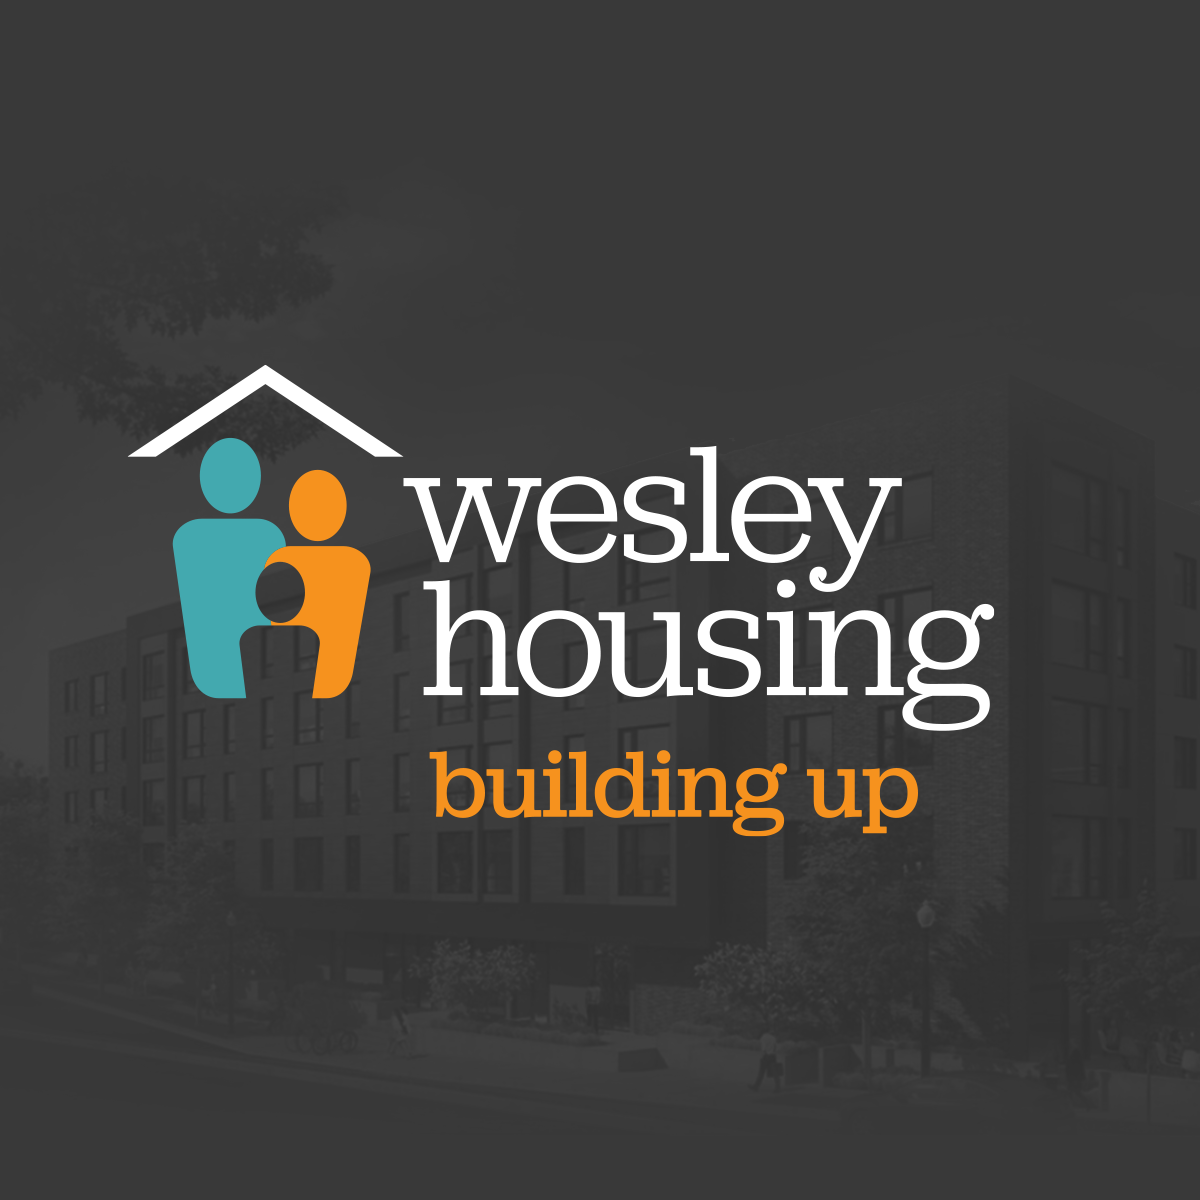 Wesley Housing Featured Image